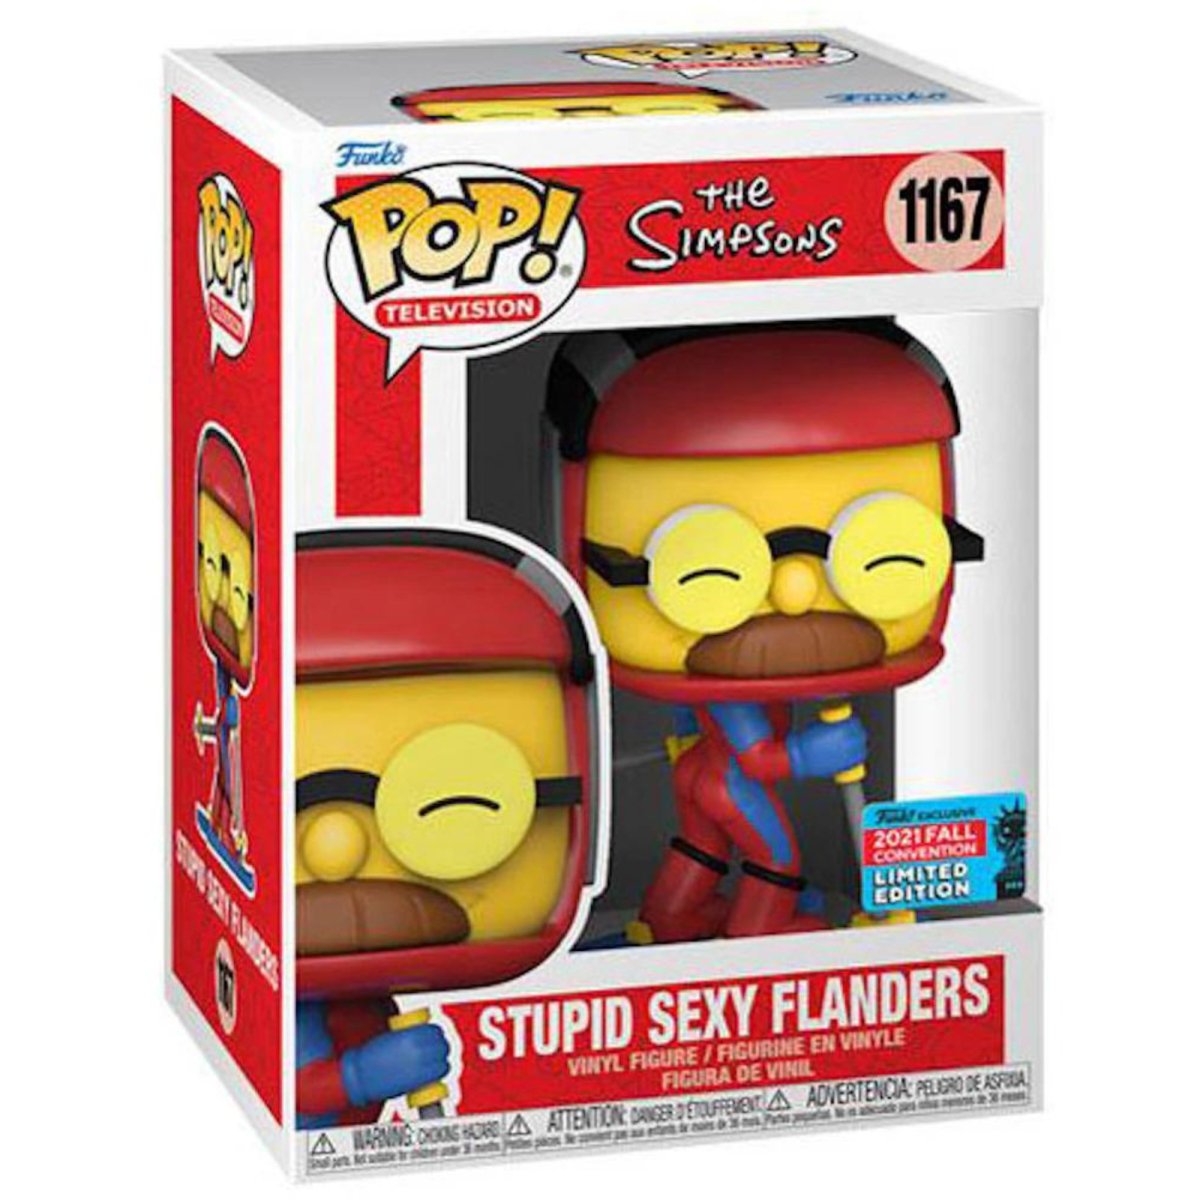 The Simpsons - Stupid Sexy Flanders (2021 Fall Convention Limited Edition) #1167 - Funko Pop! Vinyl Animation - Persona Toys